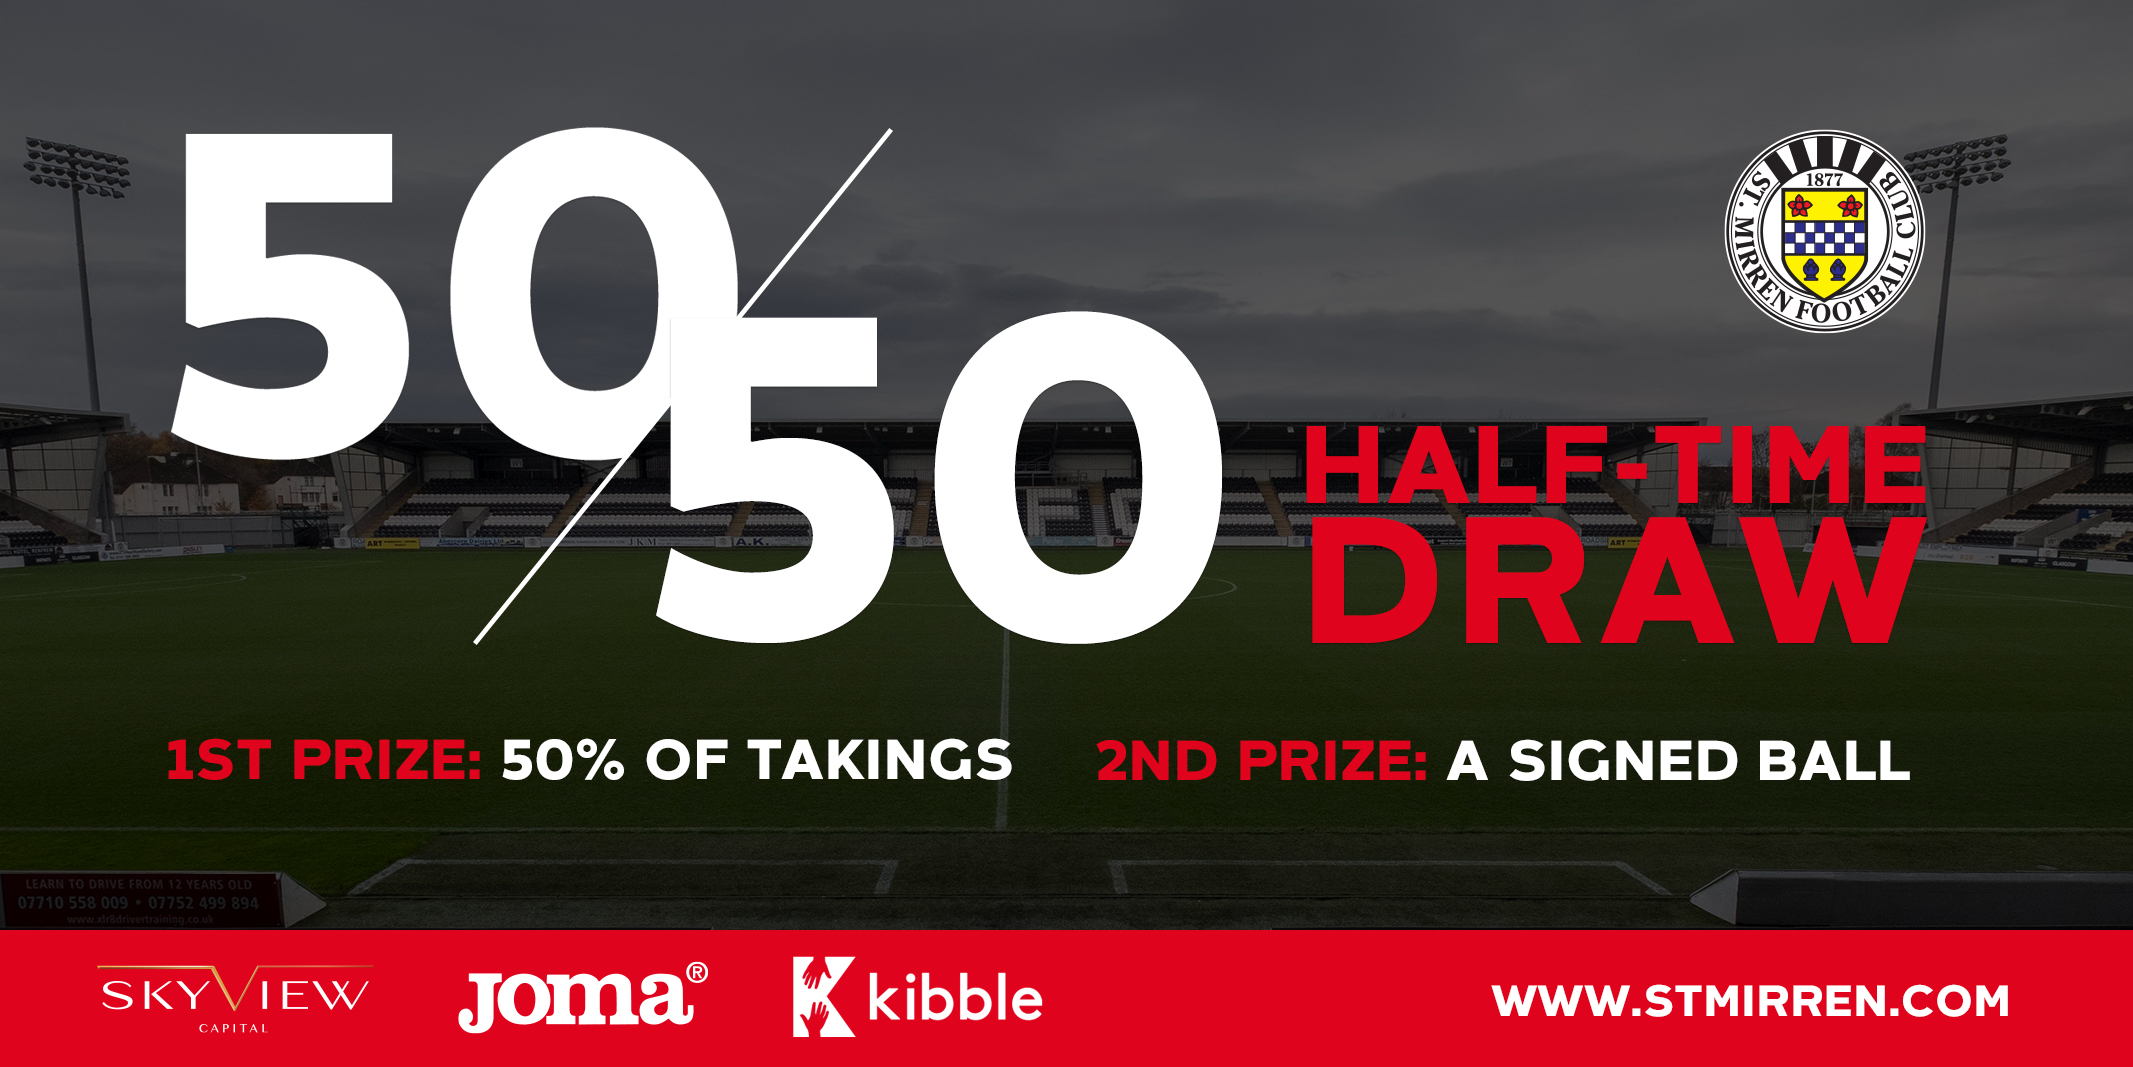 Virtual 50/50 draw launches this Saturday